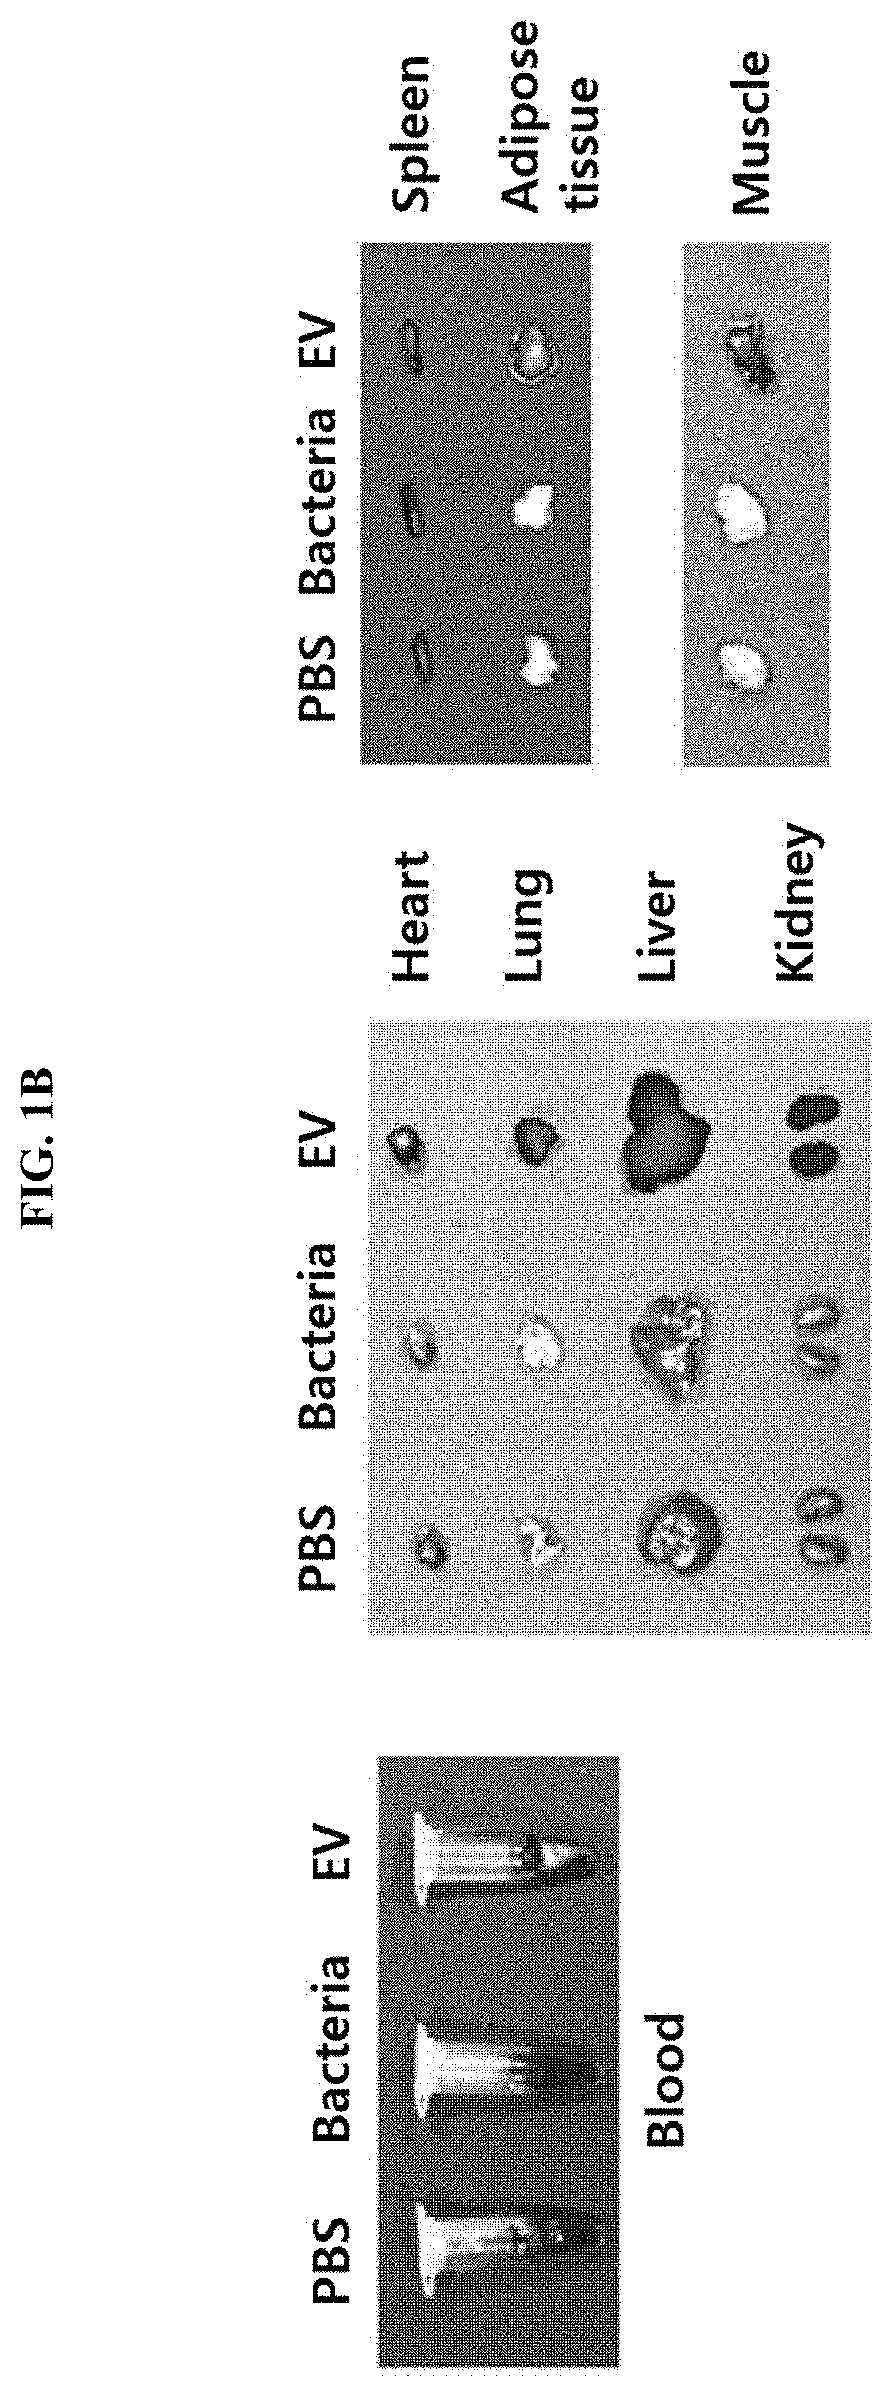 Nanovesicles derived from bacteria of genus deinococcus, and use thereof